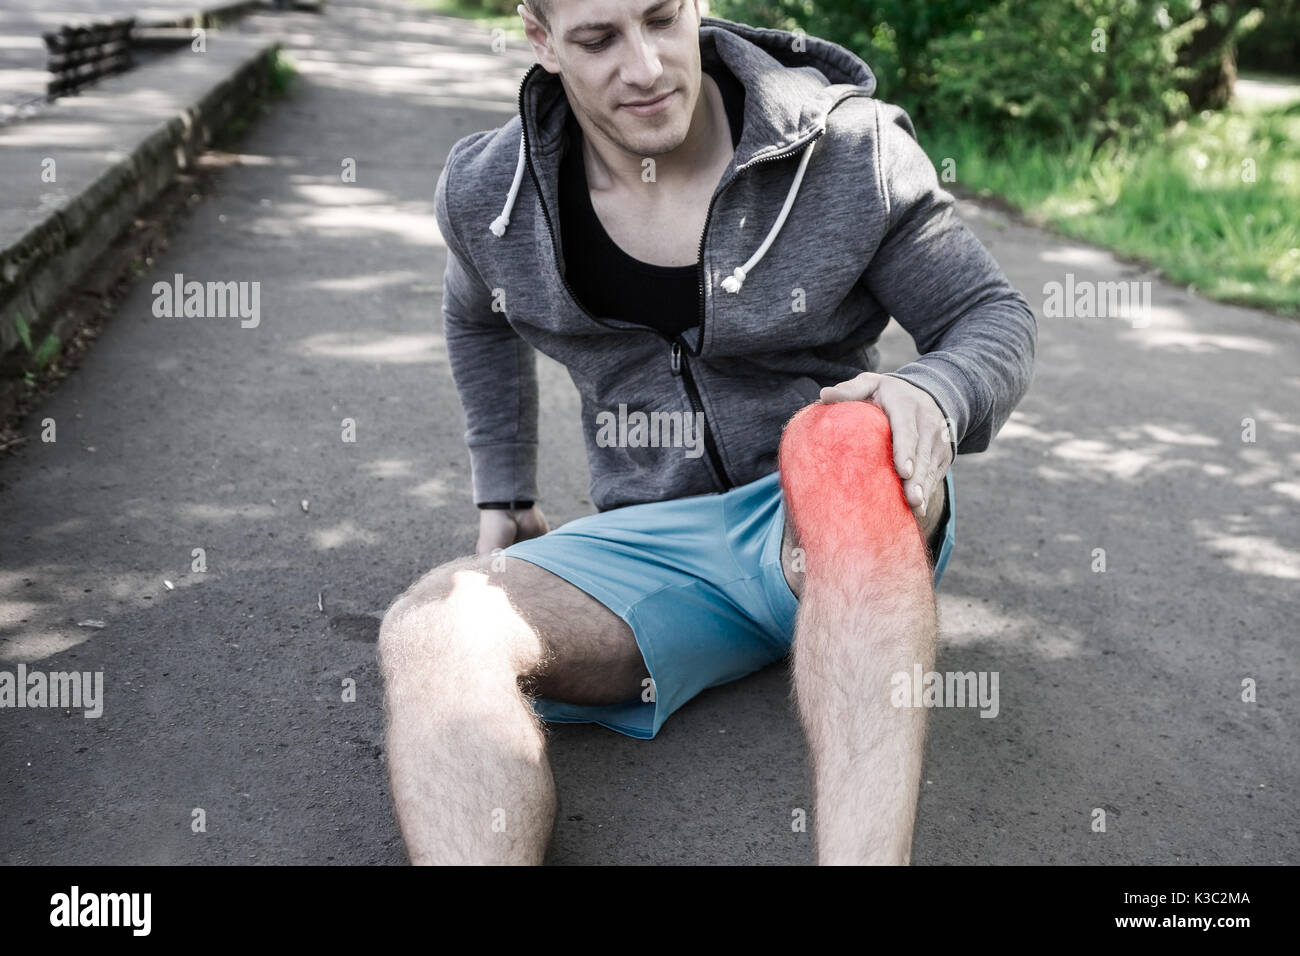 A photo of a man sitting down on the ground and suffering from knee injury. Stock Photo